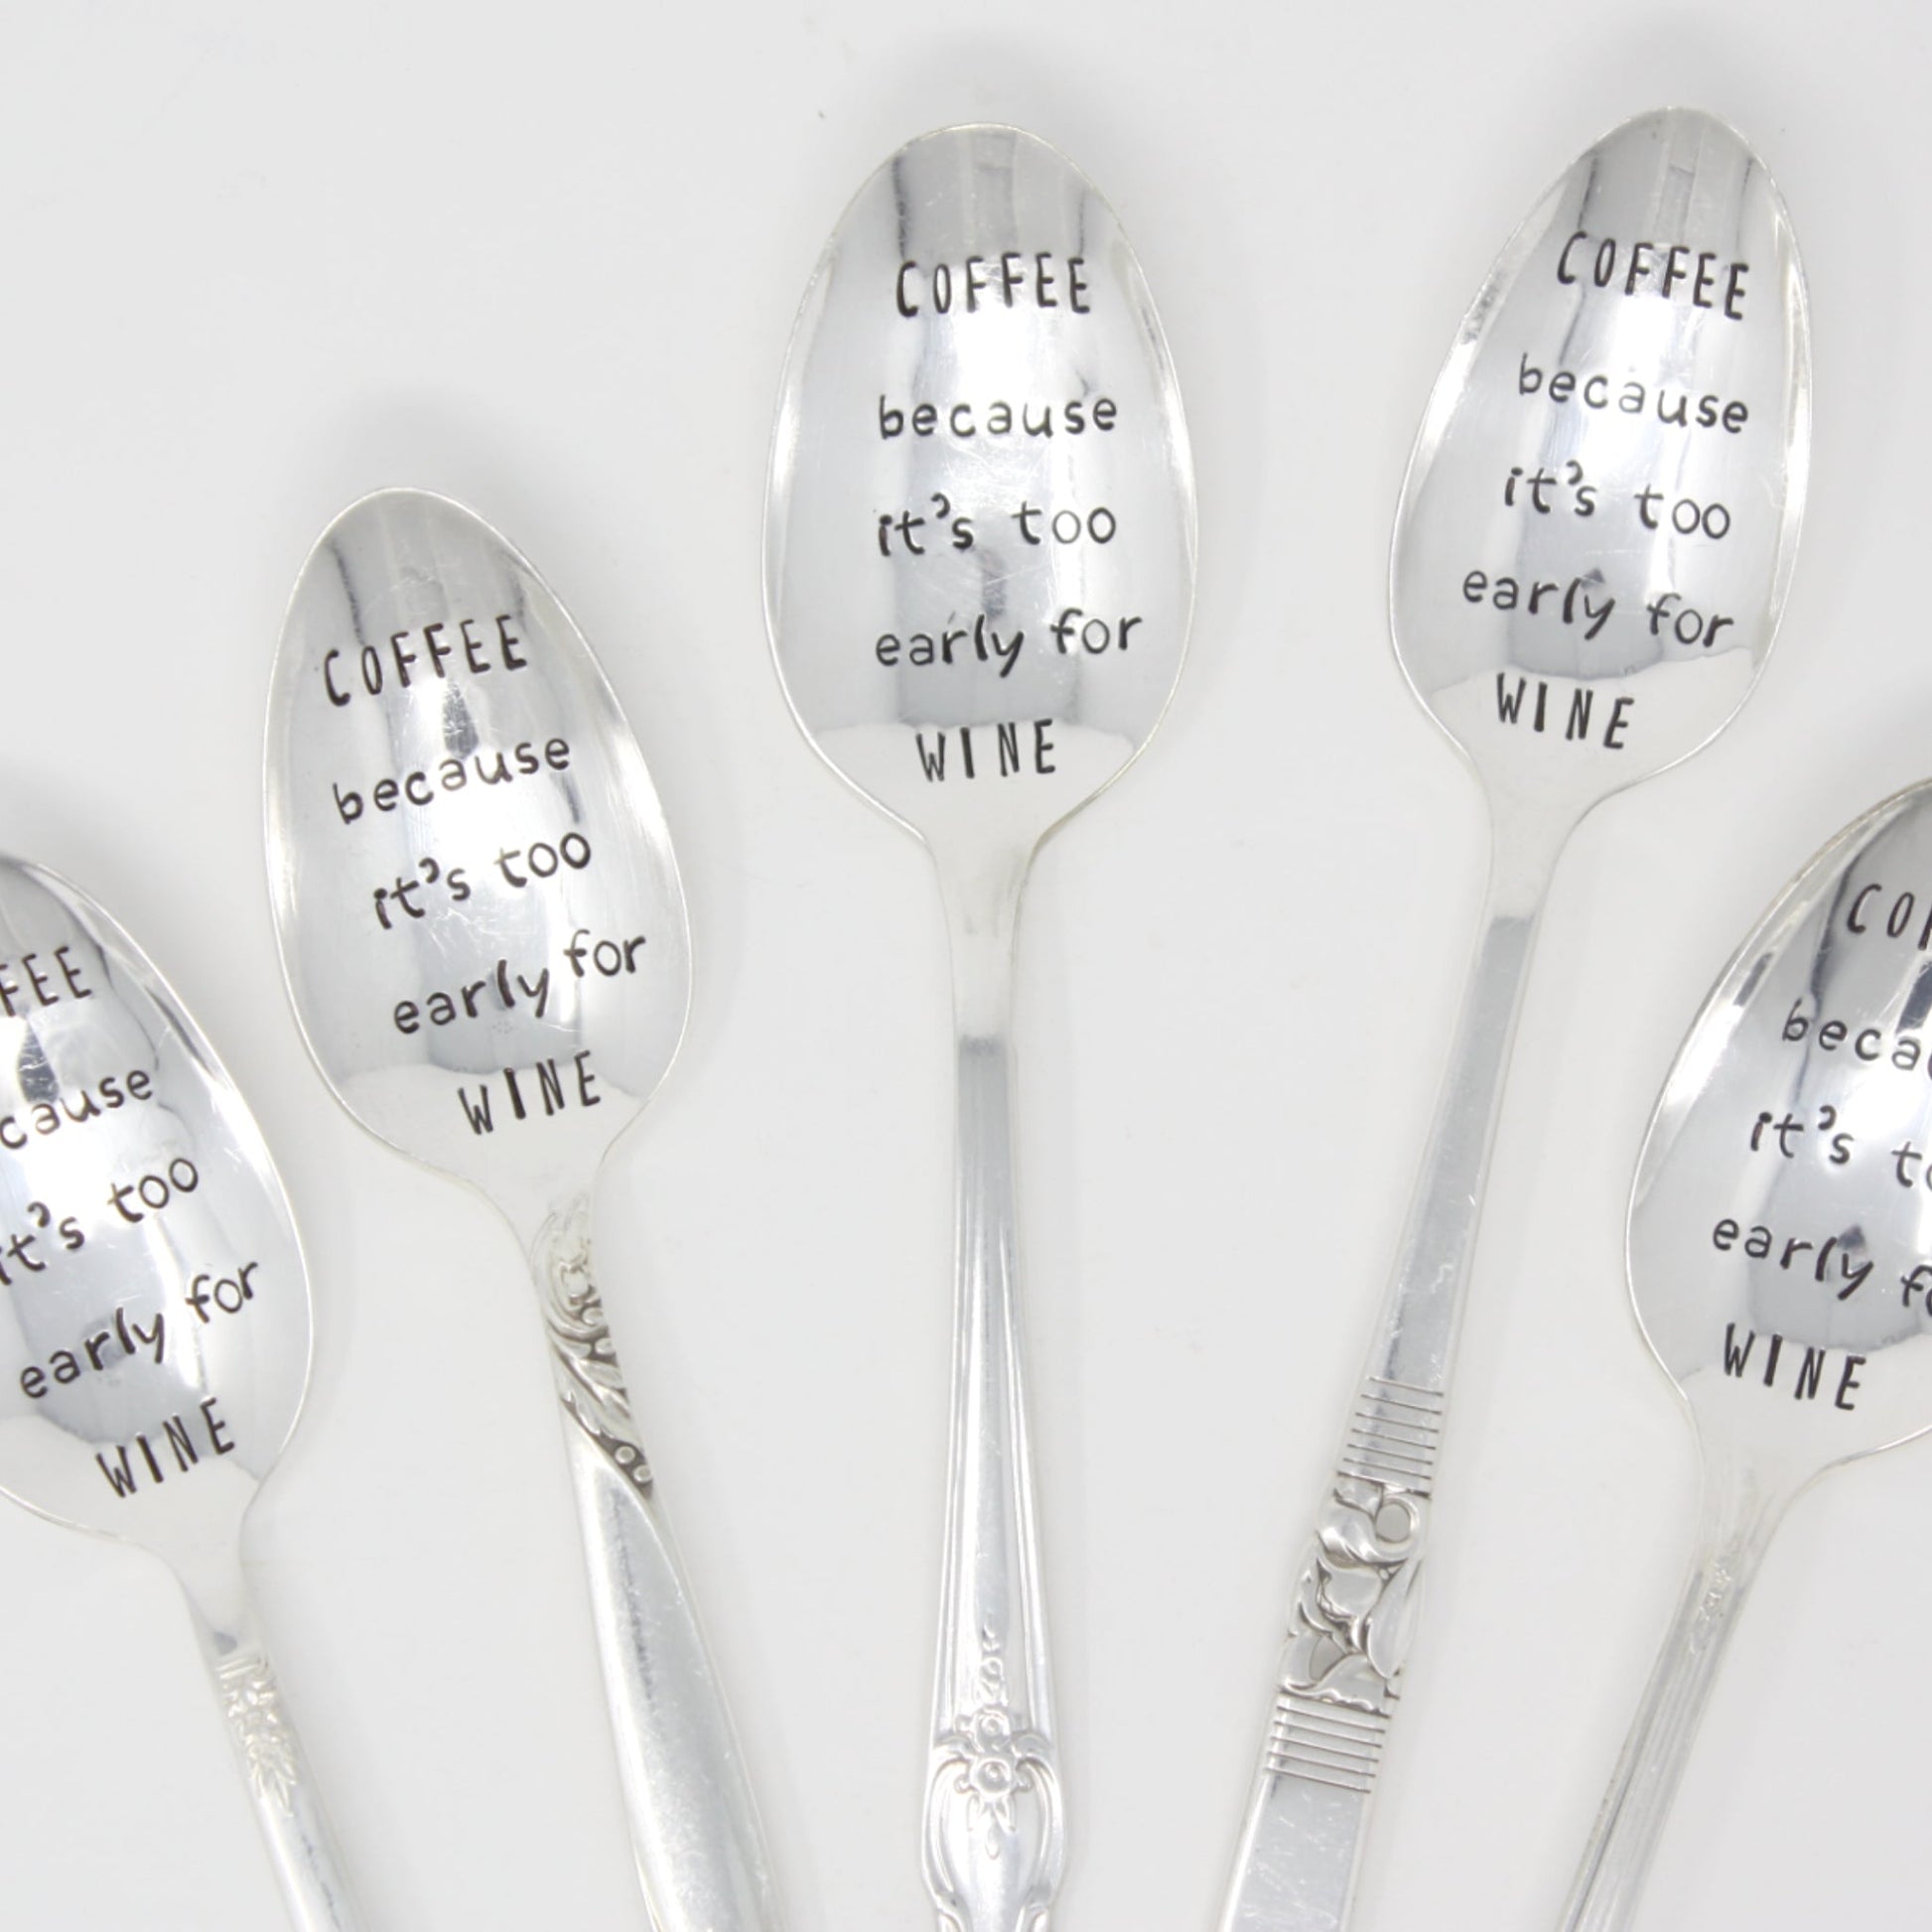 Vintage Stamped Spoons - Coffee Because It's Too Early for Wine - Made in the USA